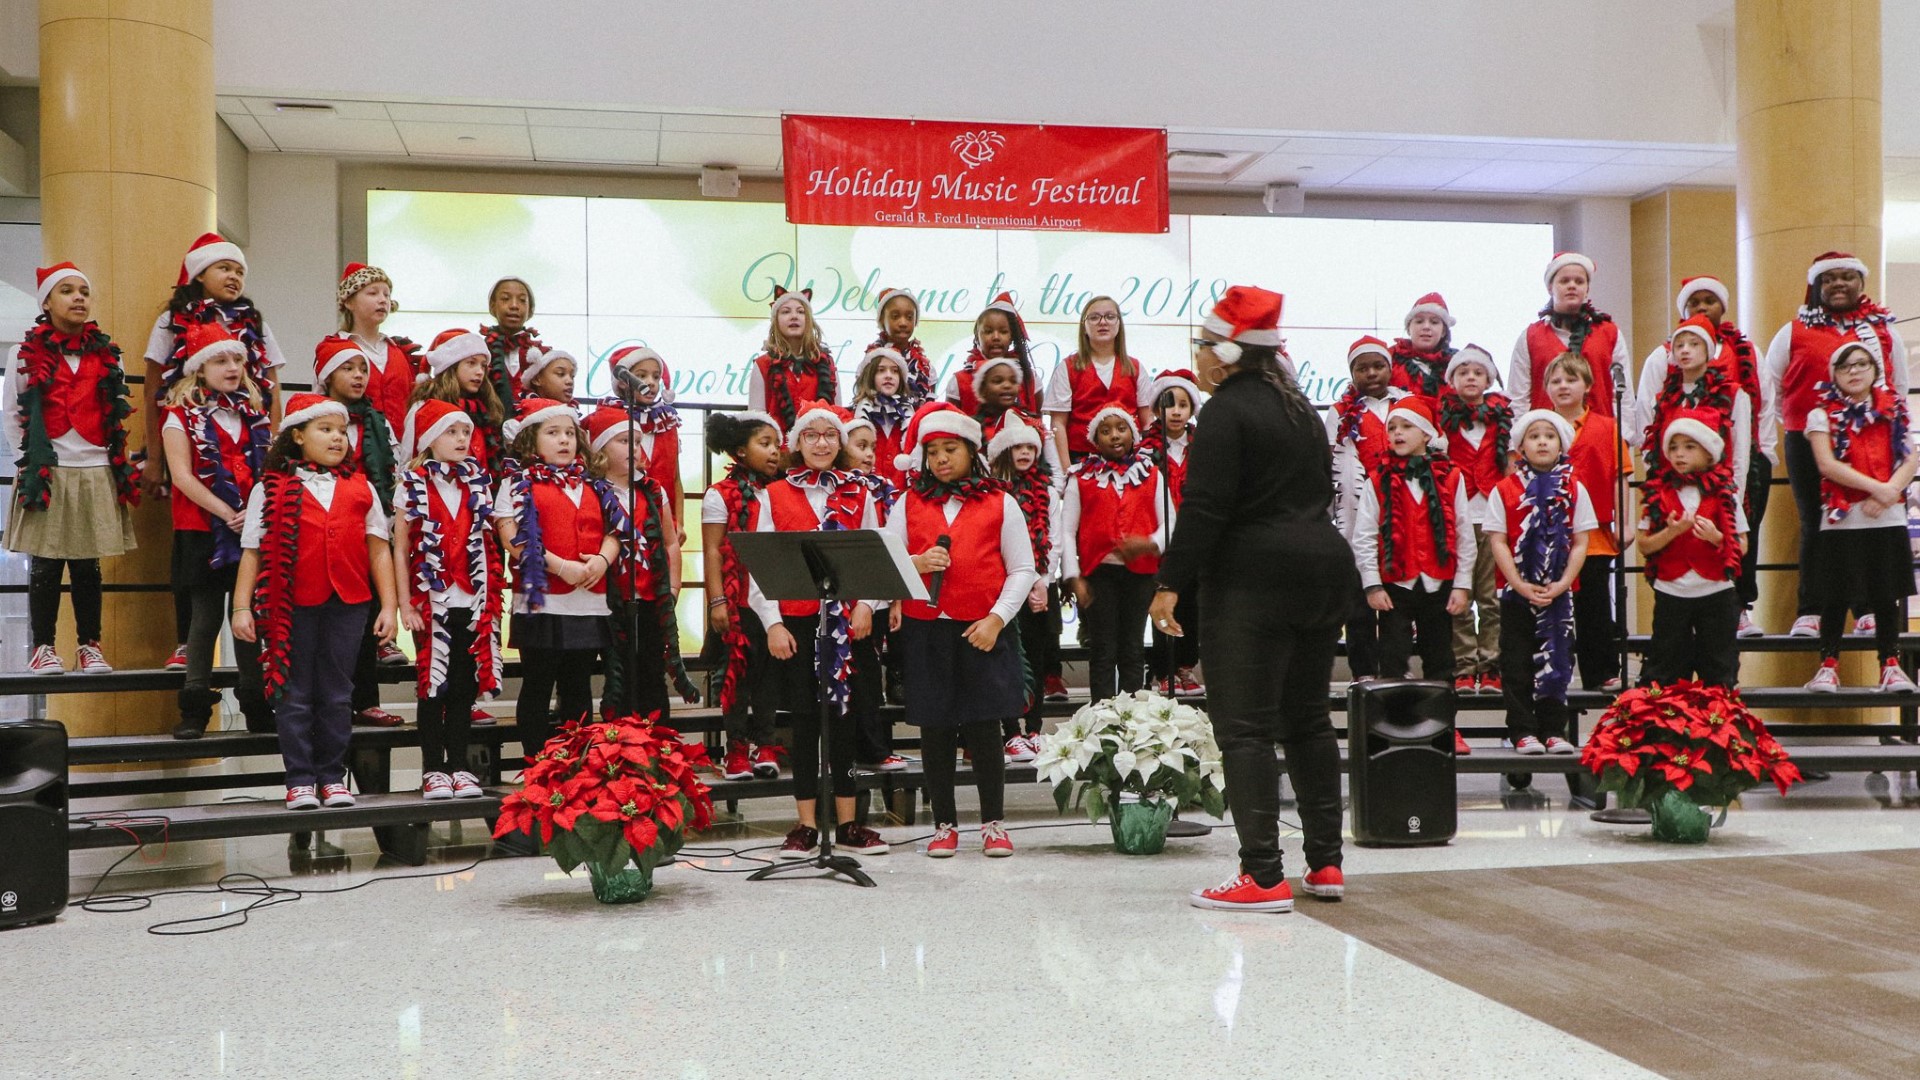 The Annual Holiday Music Festival is back for its 26th year, beginning on Dec. 5 and lasting through the week.